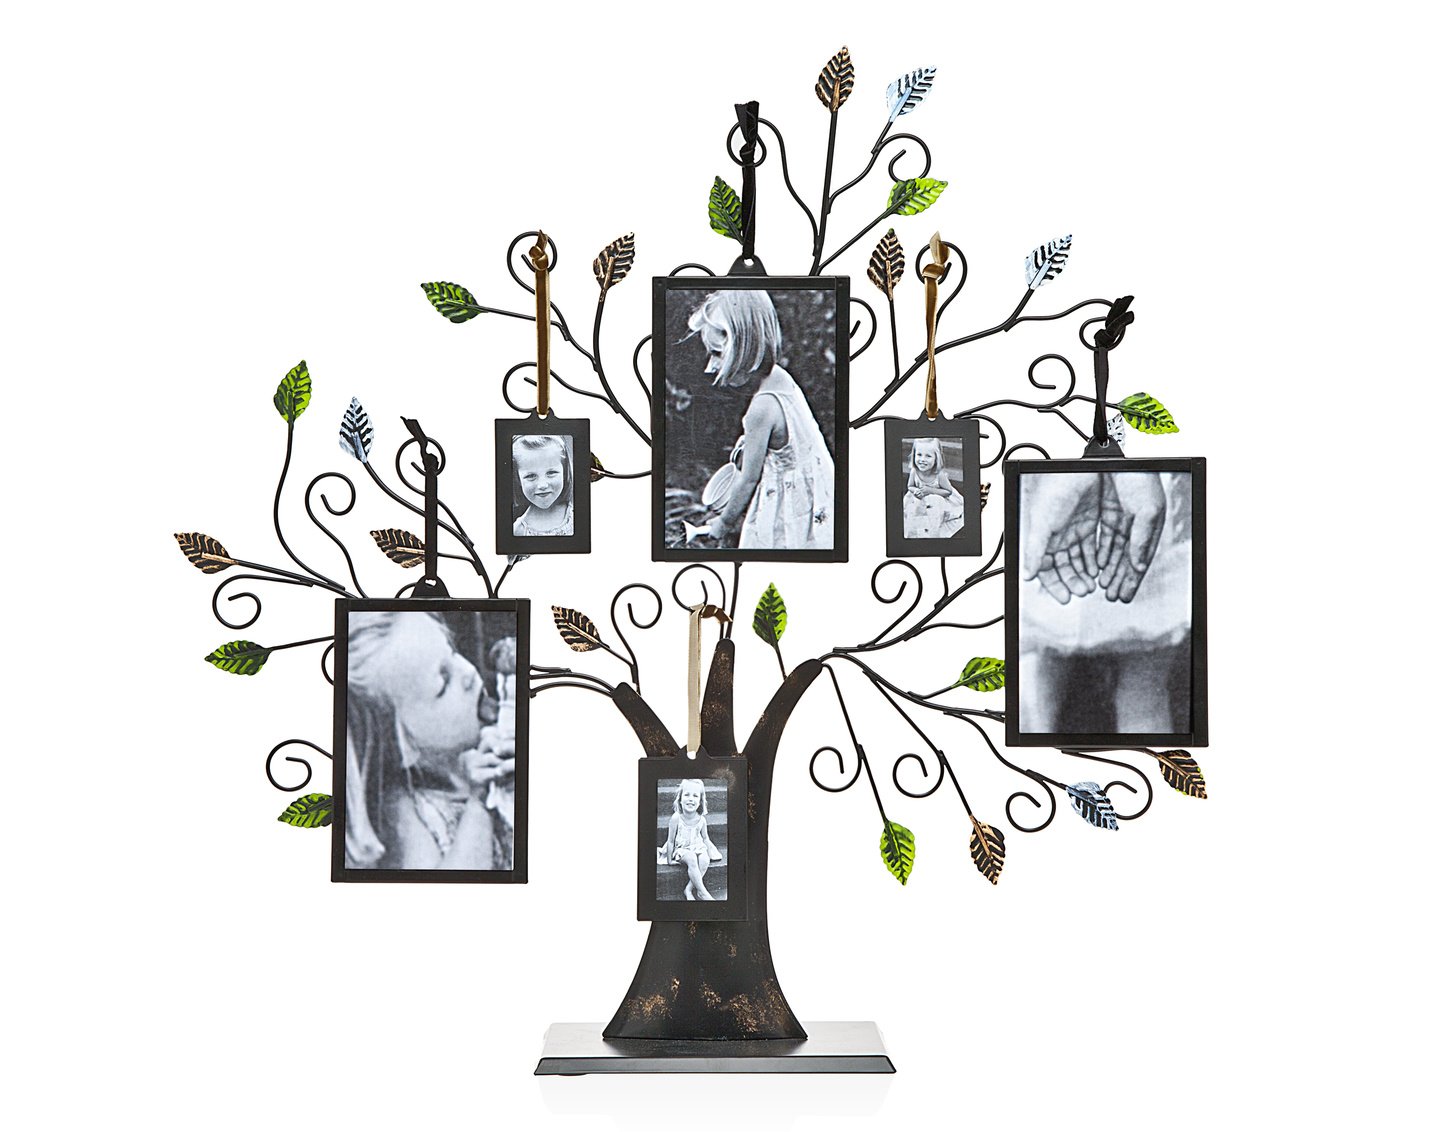 Philip Whitney 20" Bronze Family Tree of Life Centerpiece Display Stand with Green Leaves and 6 Hanging Photo Picture Frames - 3 Each of 4x6 an...